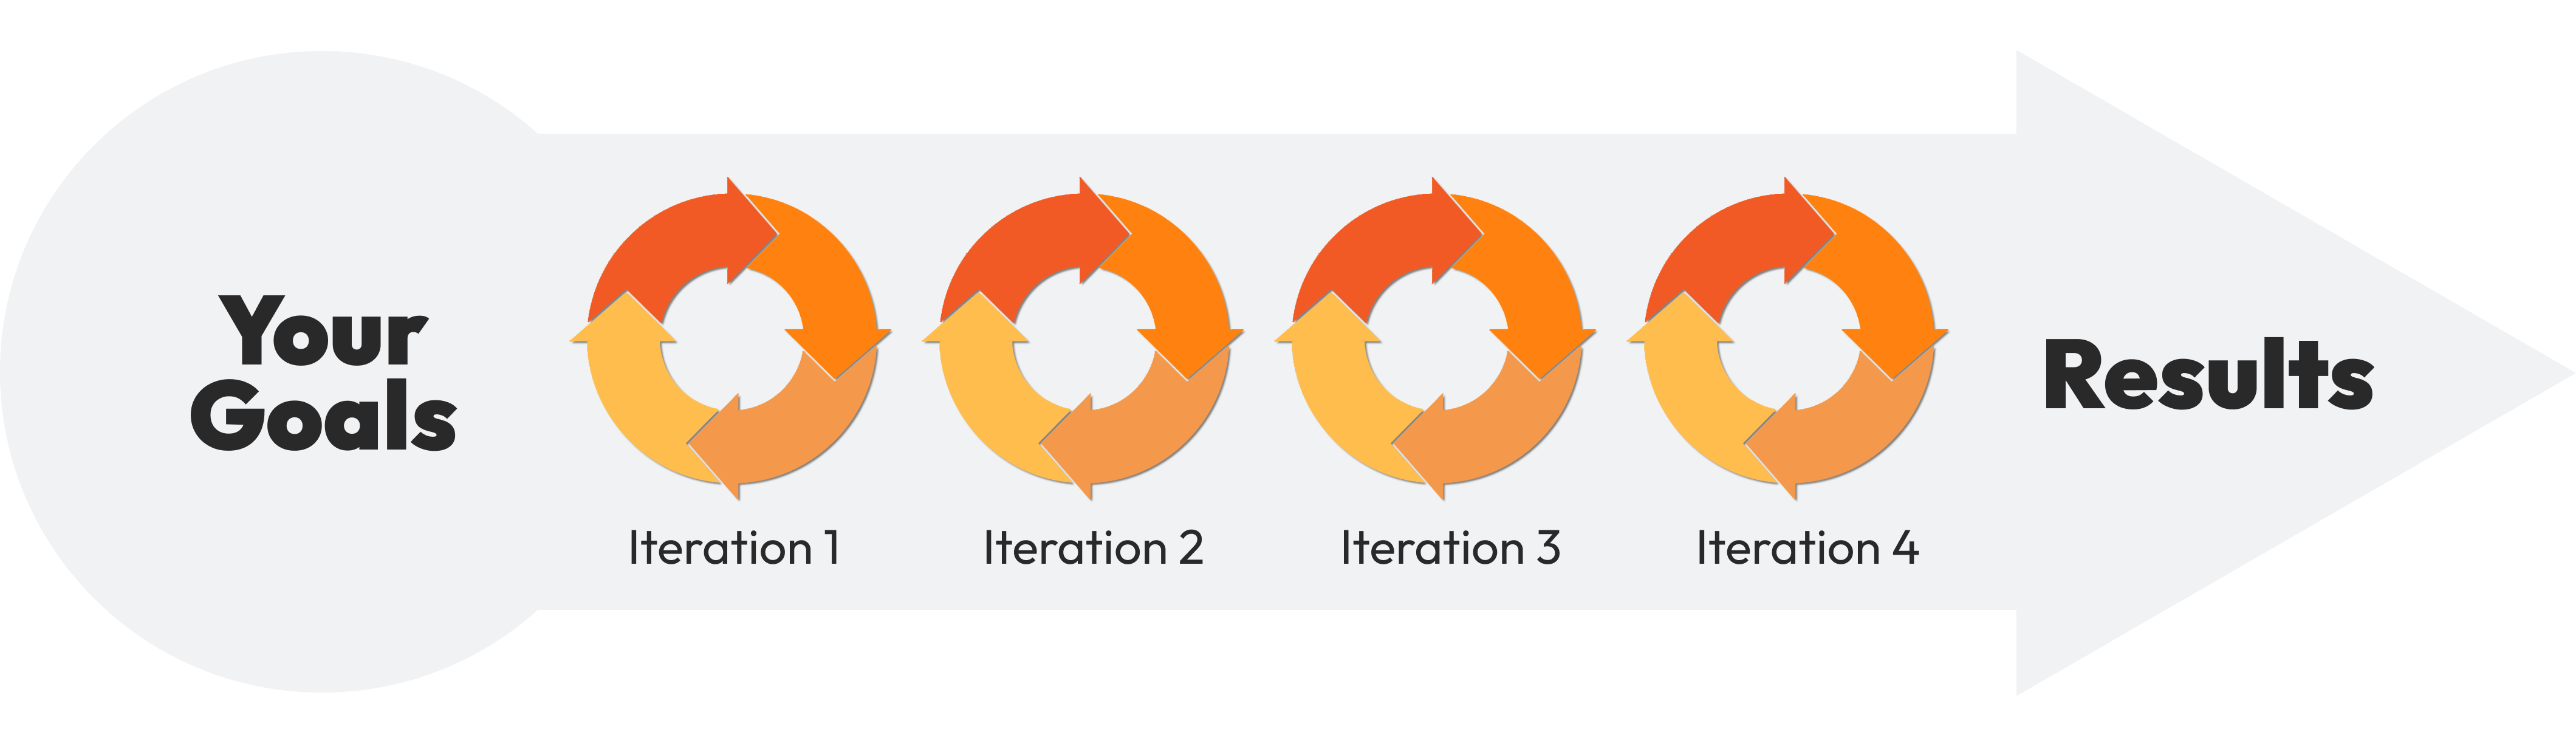 Real cycles in the iteration cycle - illustration